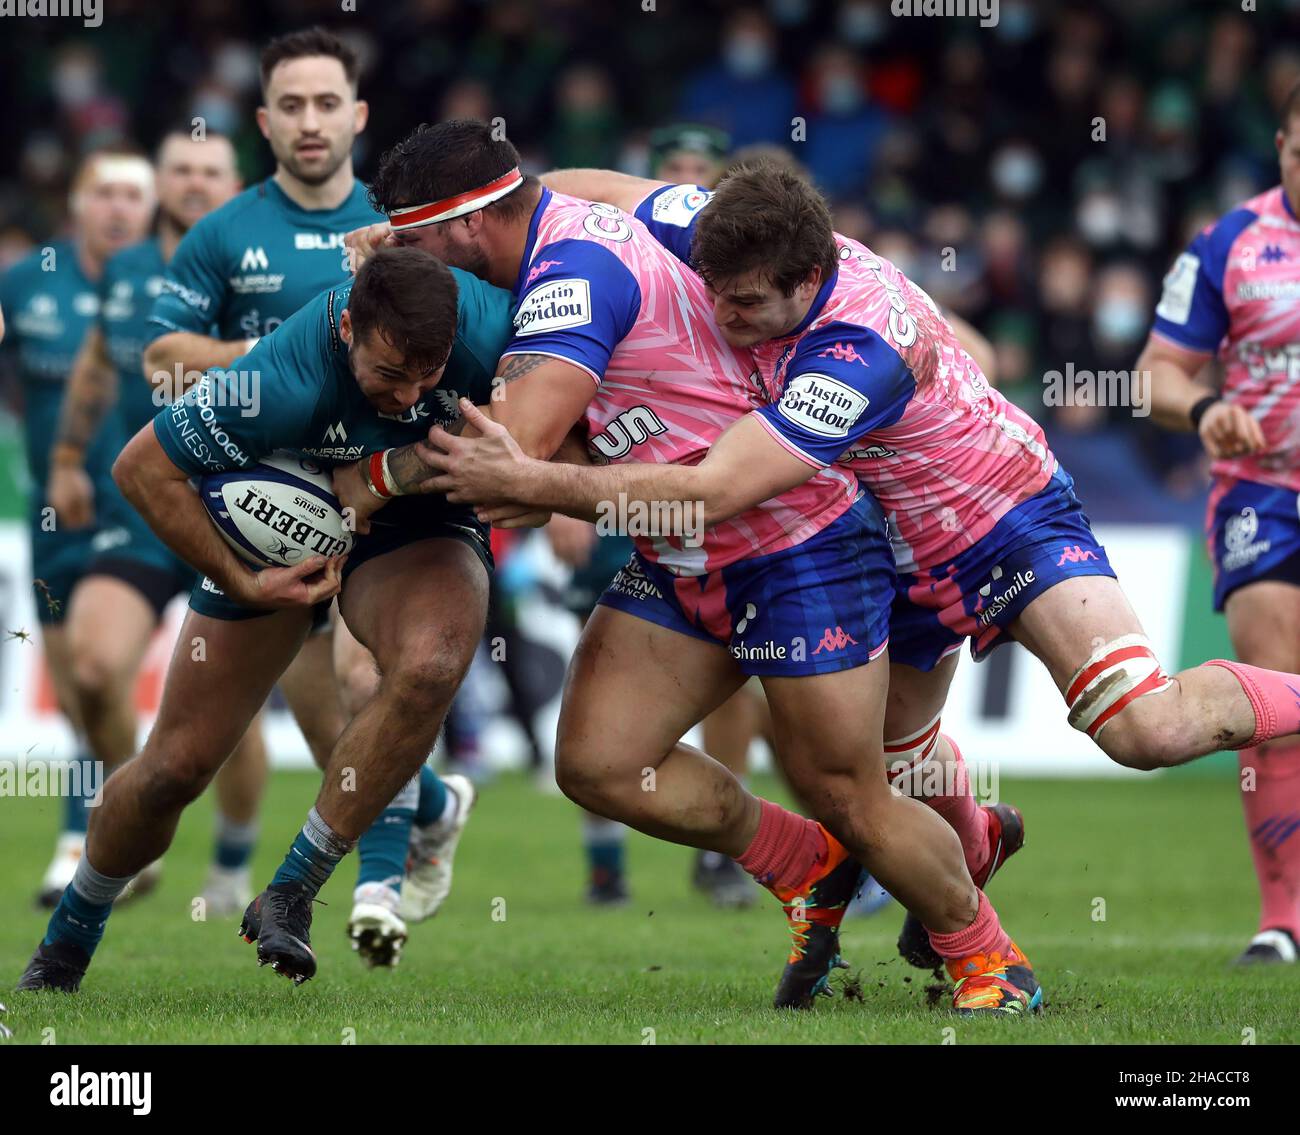 Connacht's Shayne Bolton tackled by Stade Francais' Nemo Roelofse and Mathieu De Giovanni during the Heineken Champions Cup Pool B match at The Galway Sportsgrounds in Galway, Ireland. Picture date: Sunday December 12, 2021. Stock Photo